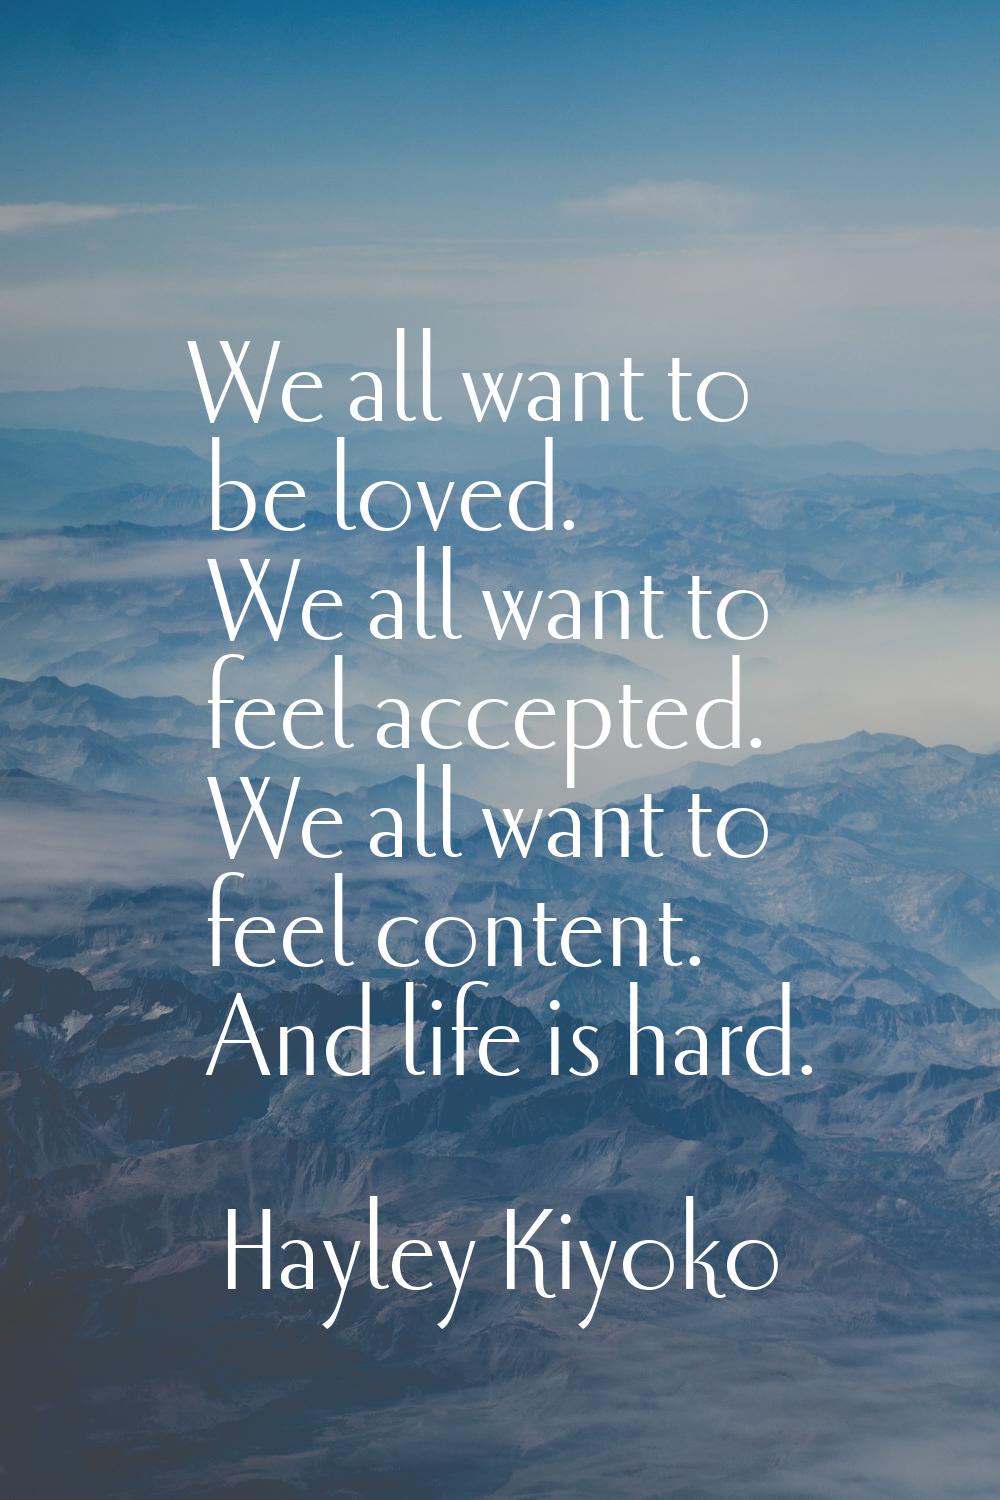 We all want to be loved. We all want to feel accepted. We all want to feel content. And life is har